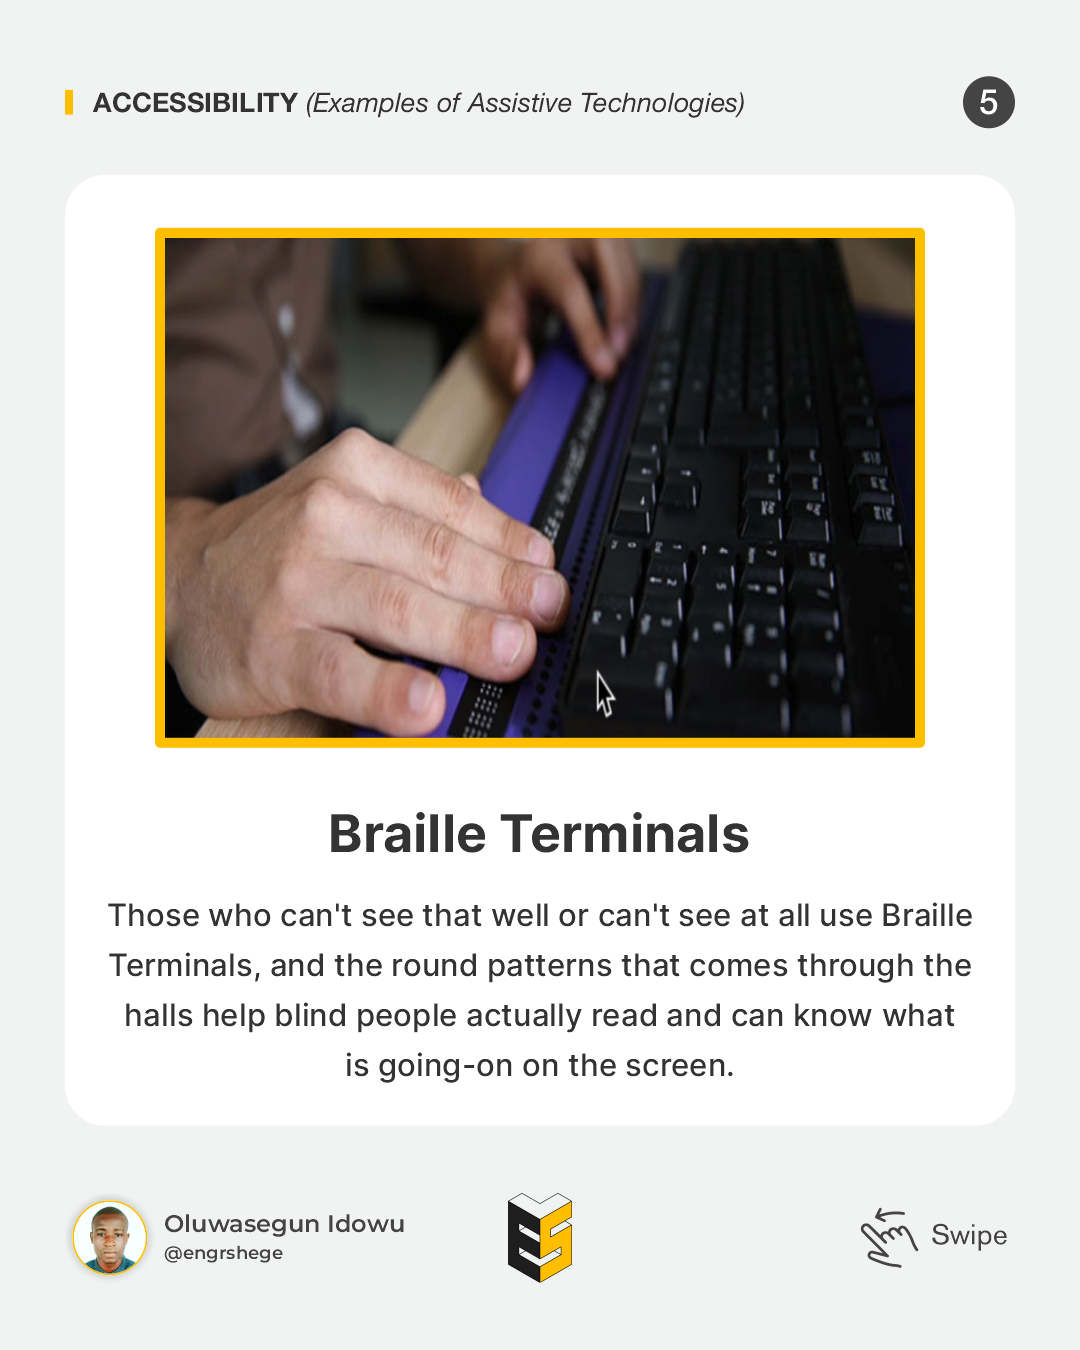 5. Examples of Assistive Technologies (Braille Terminals)